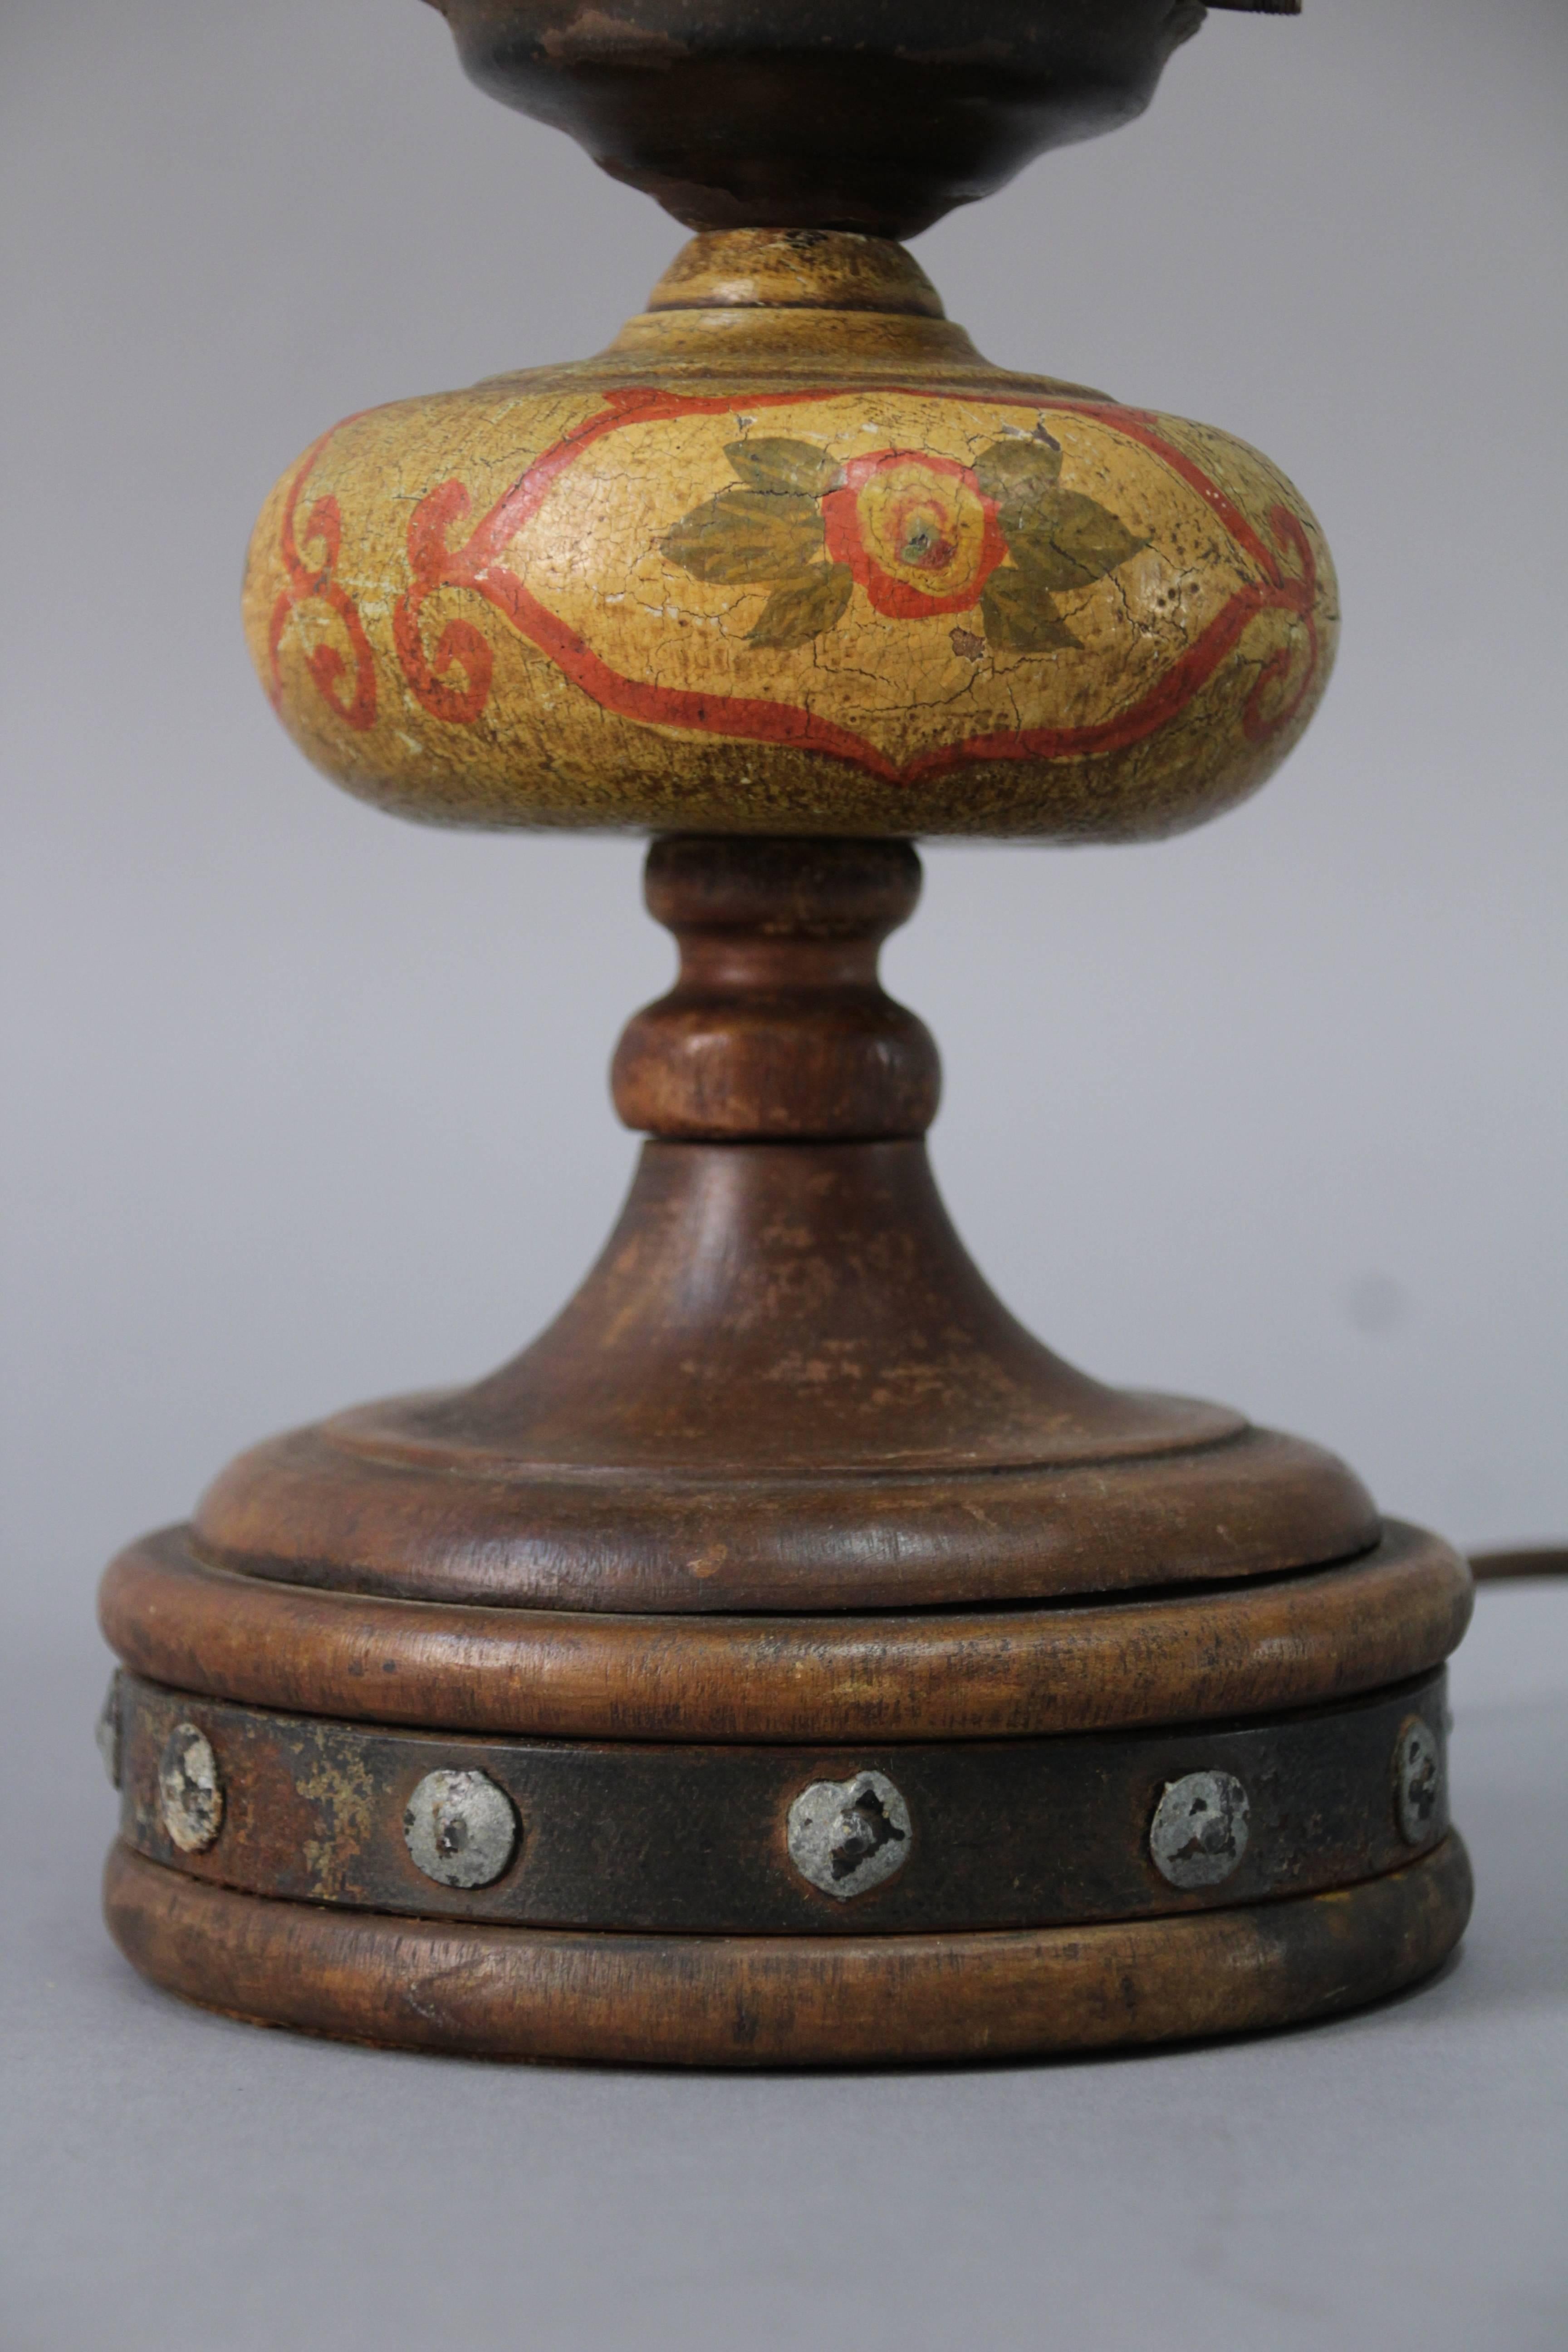 Small table lamp attributed to the Monterey Company, circa 1930s.